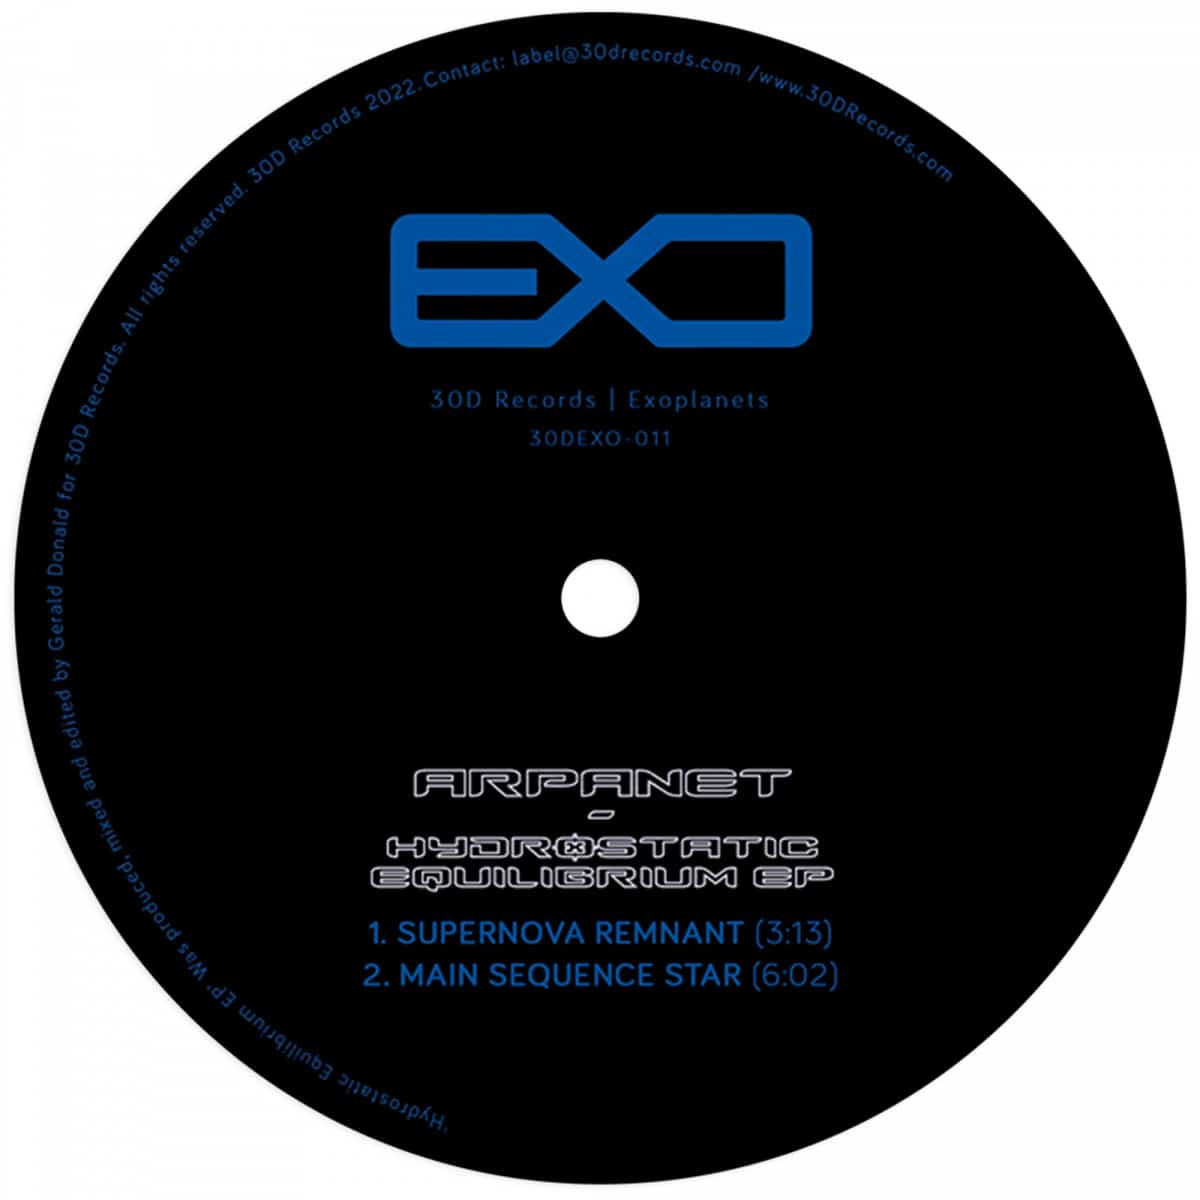 Arpanet - Hydrostatic Equilibrium EP - 30DEXO-011 - 30D EXPOPLANETS